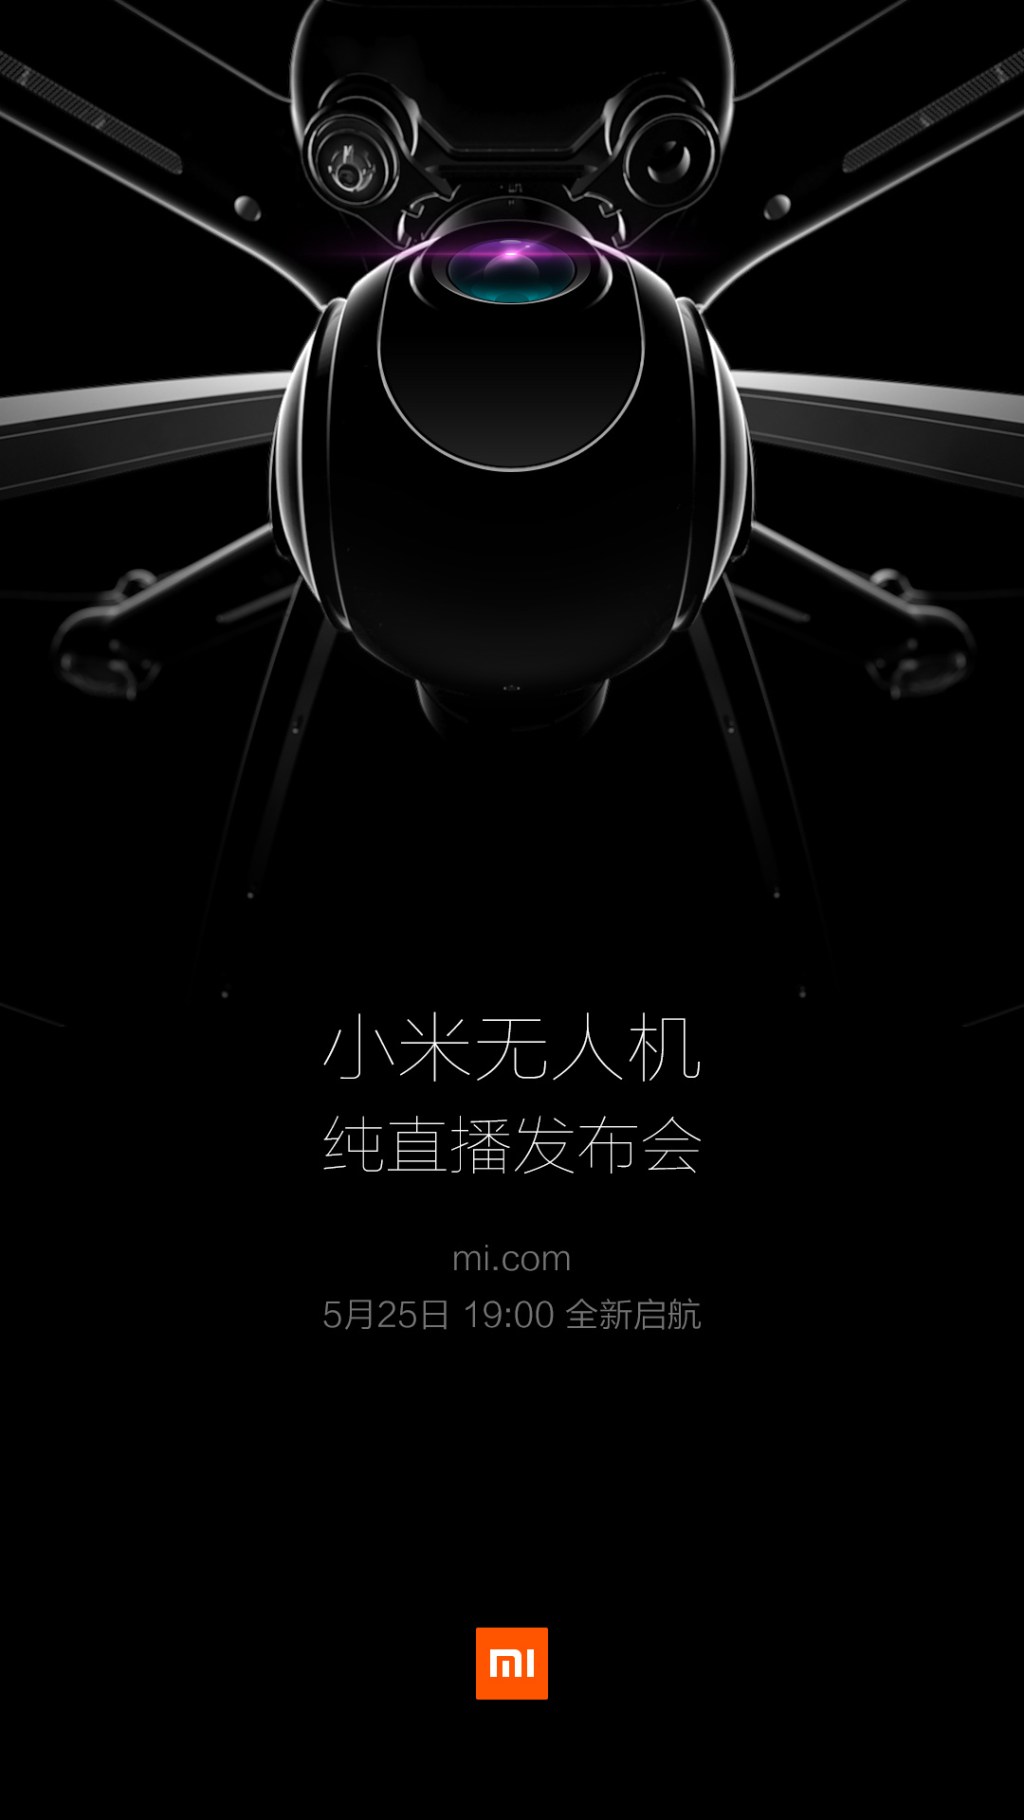 Get ready for the Xiaomi drone